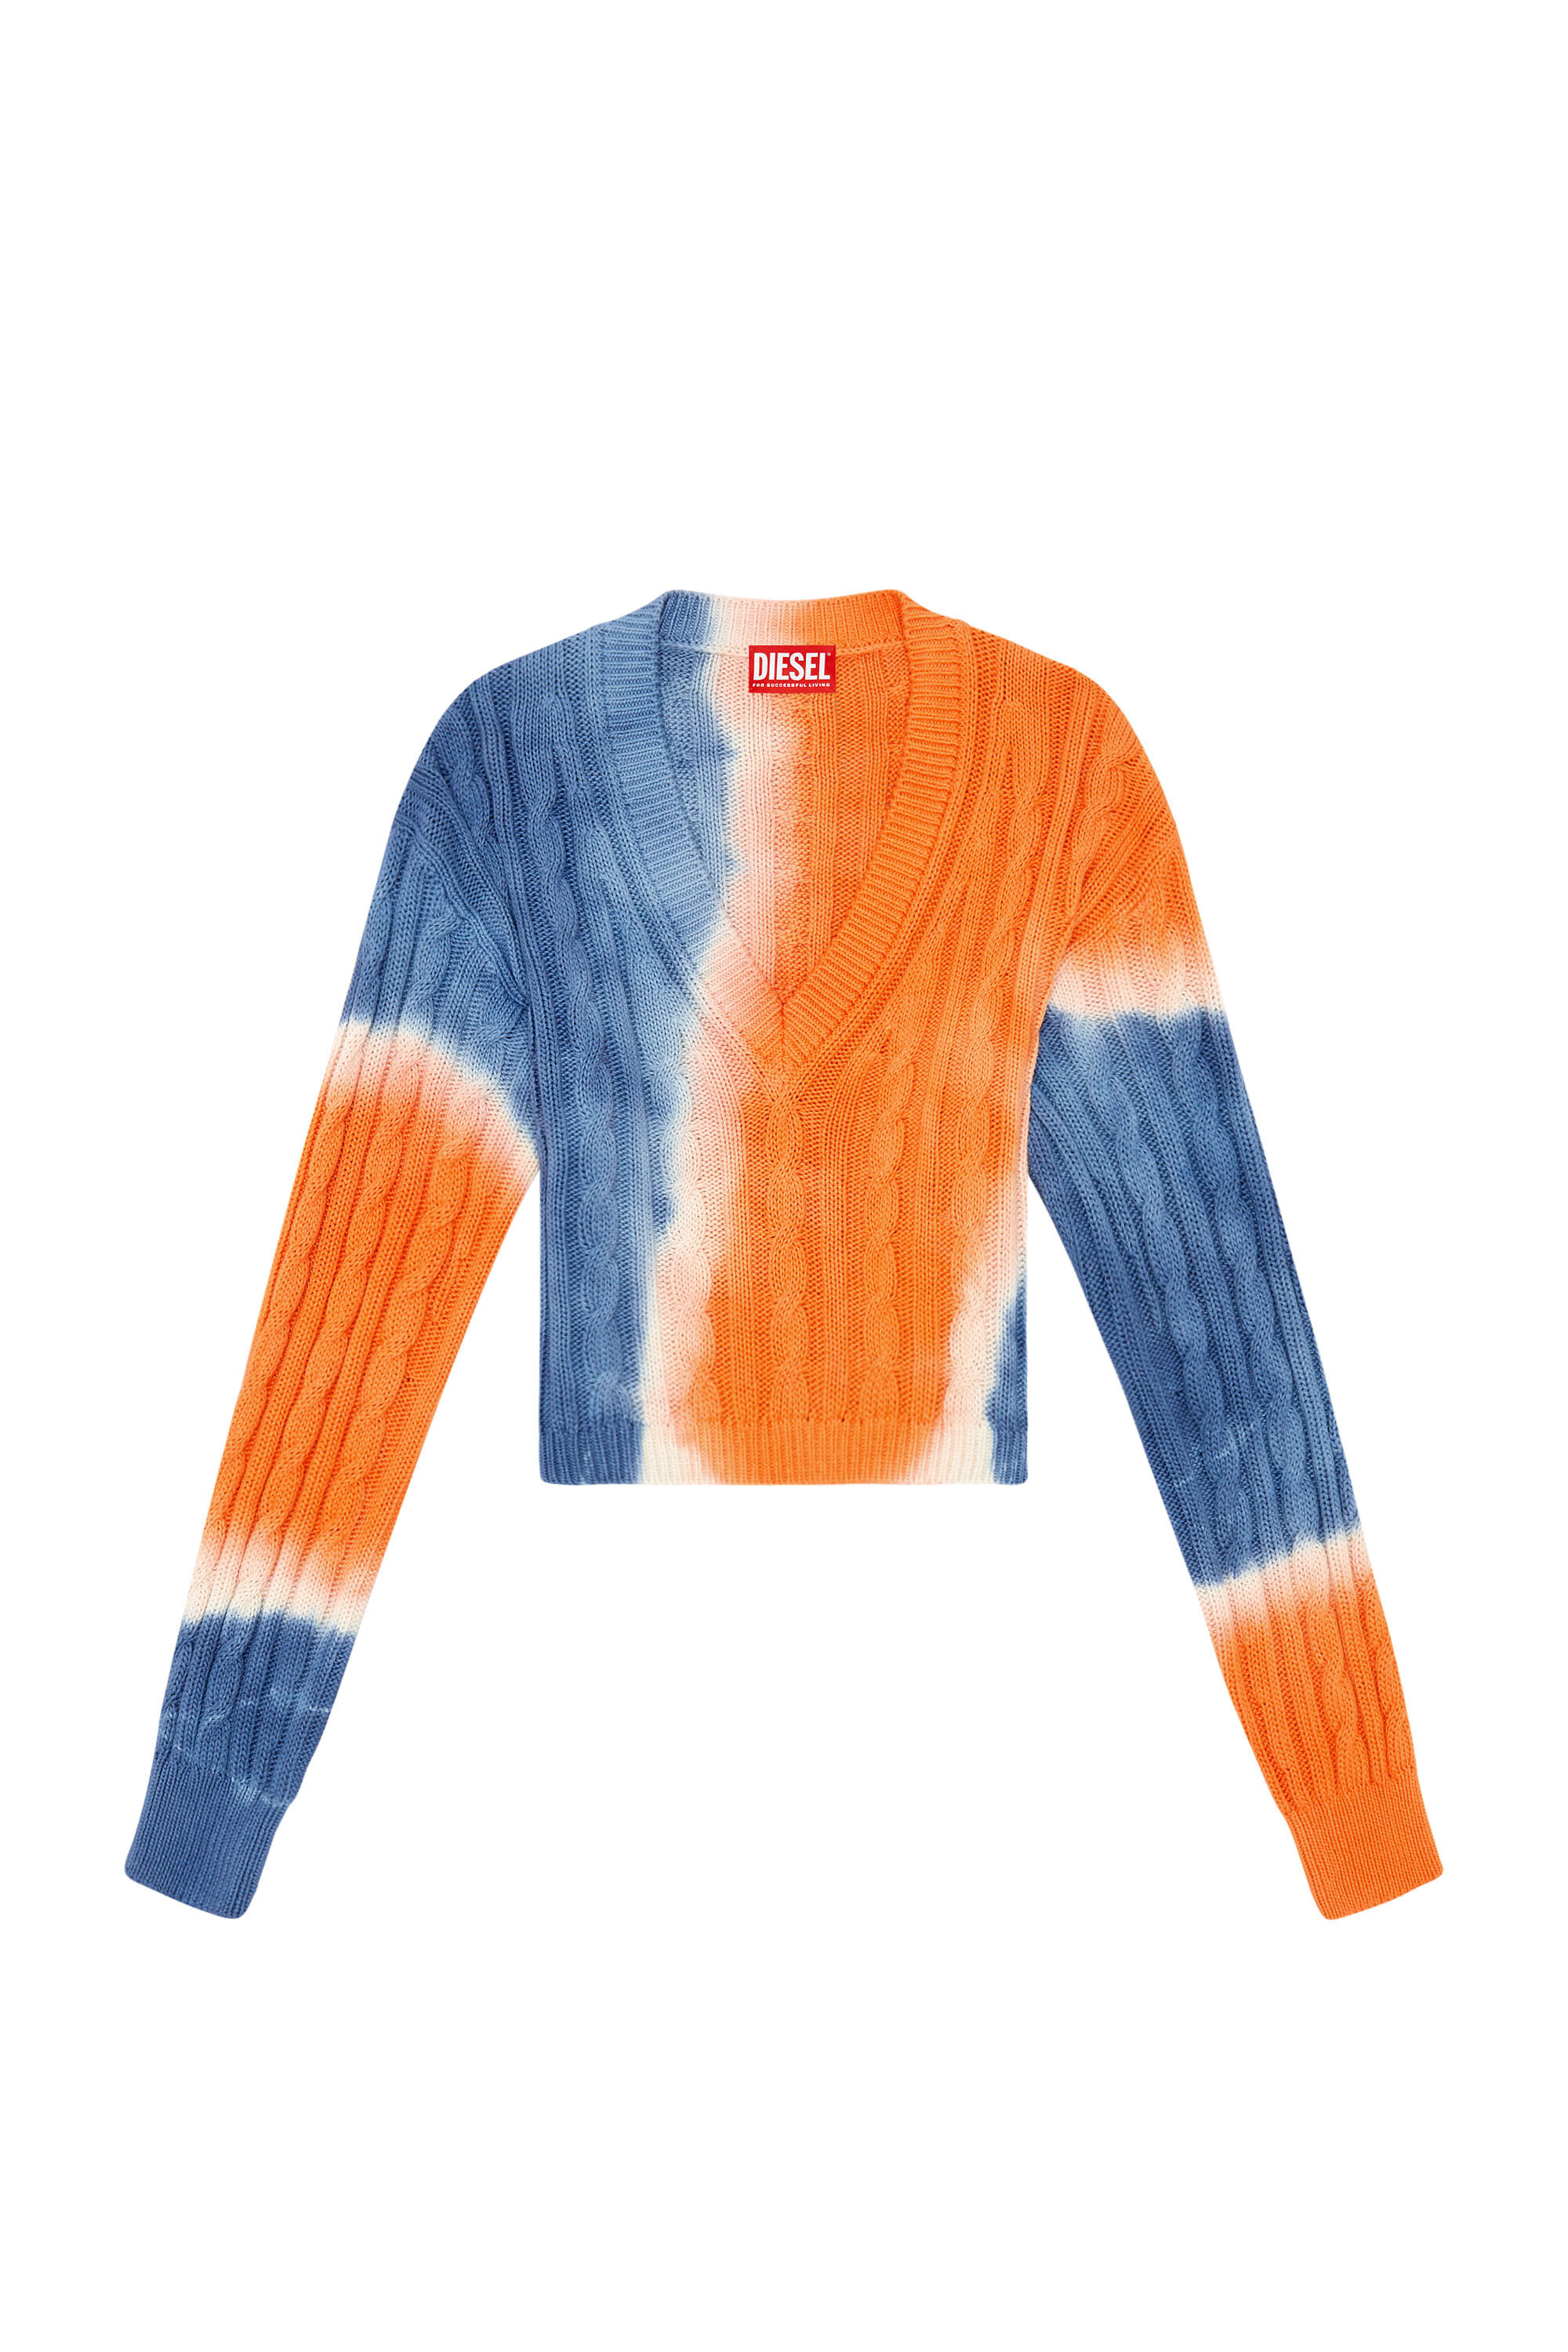 Diesel - M-JANEL, Female Tie-dye jumper in cable-knit cotton in Multicolor - Image 2